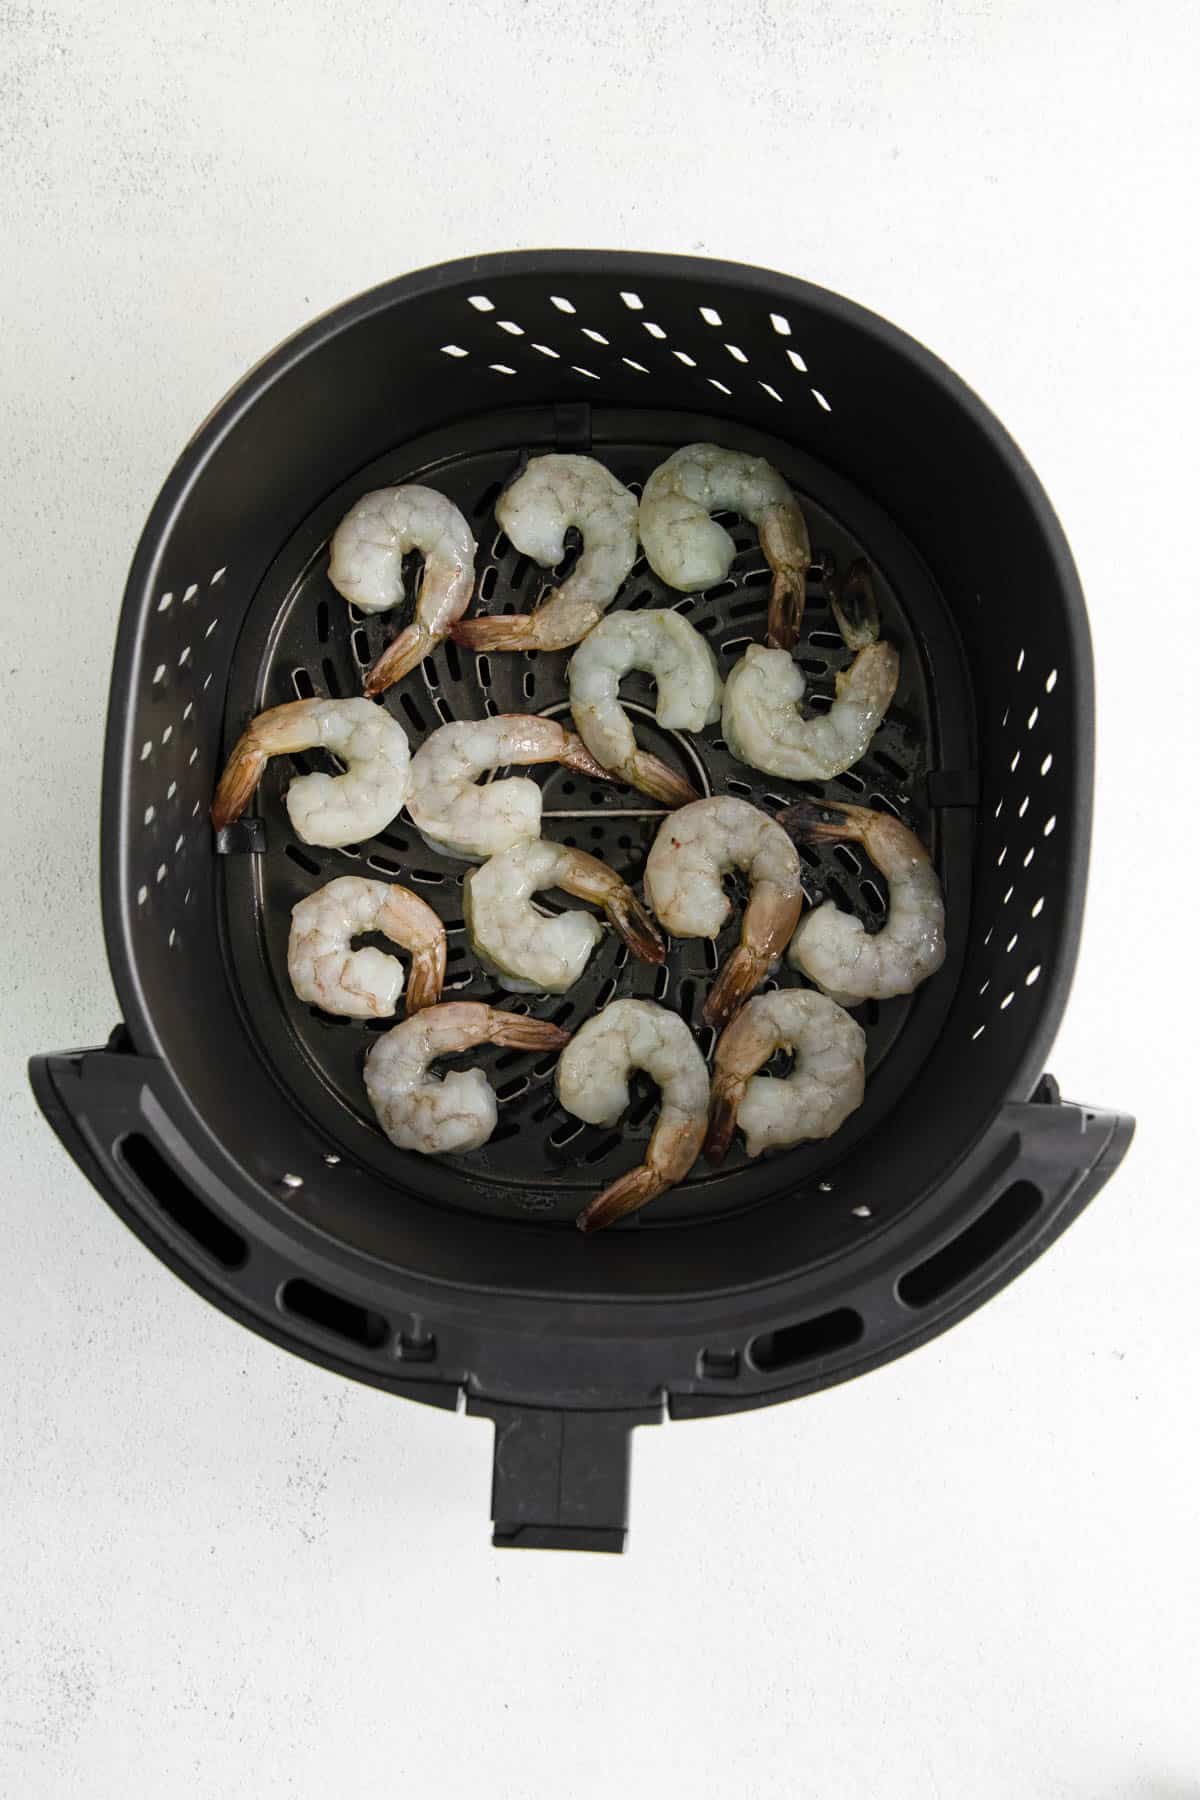 An air fryer basket with raw shrimp in it.